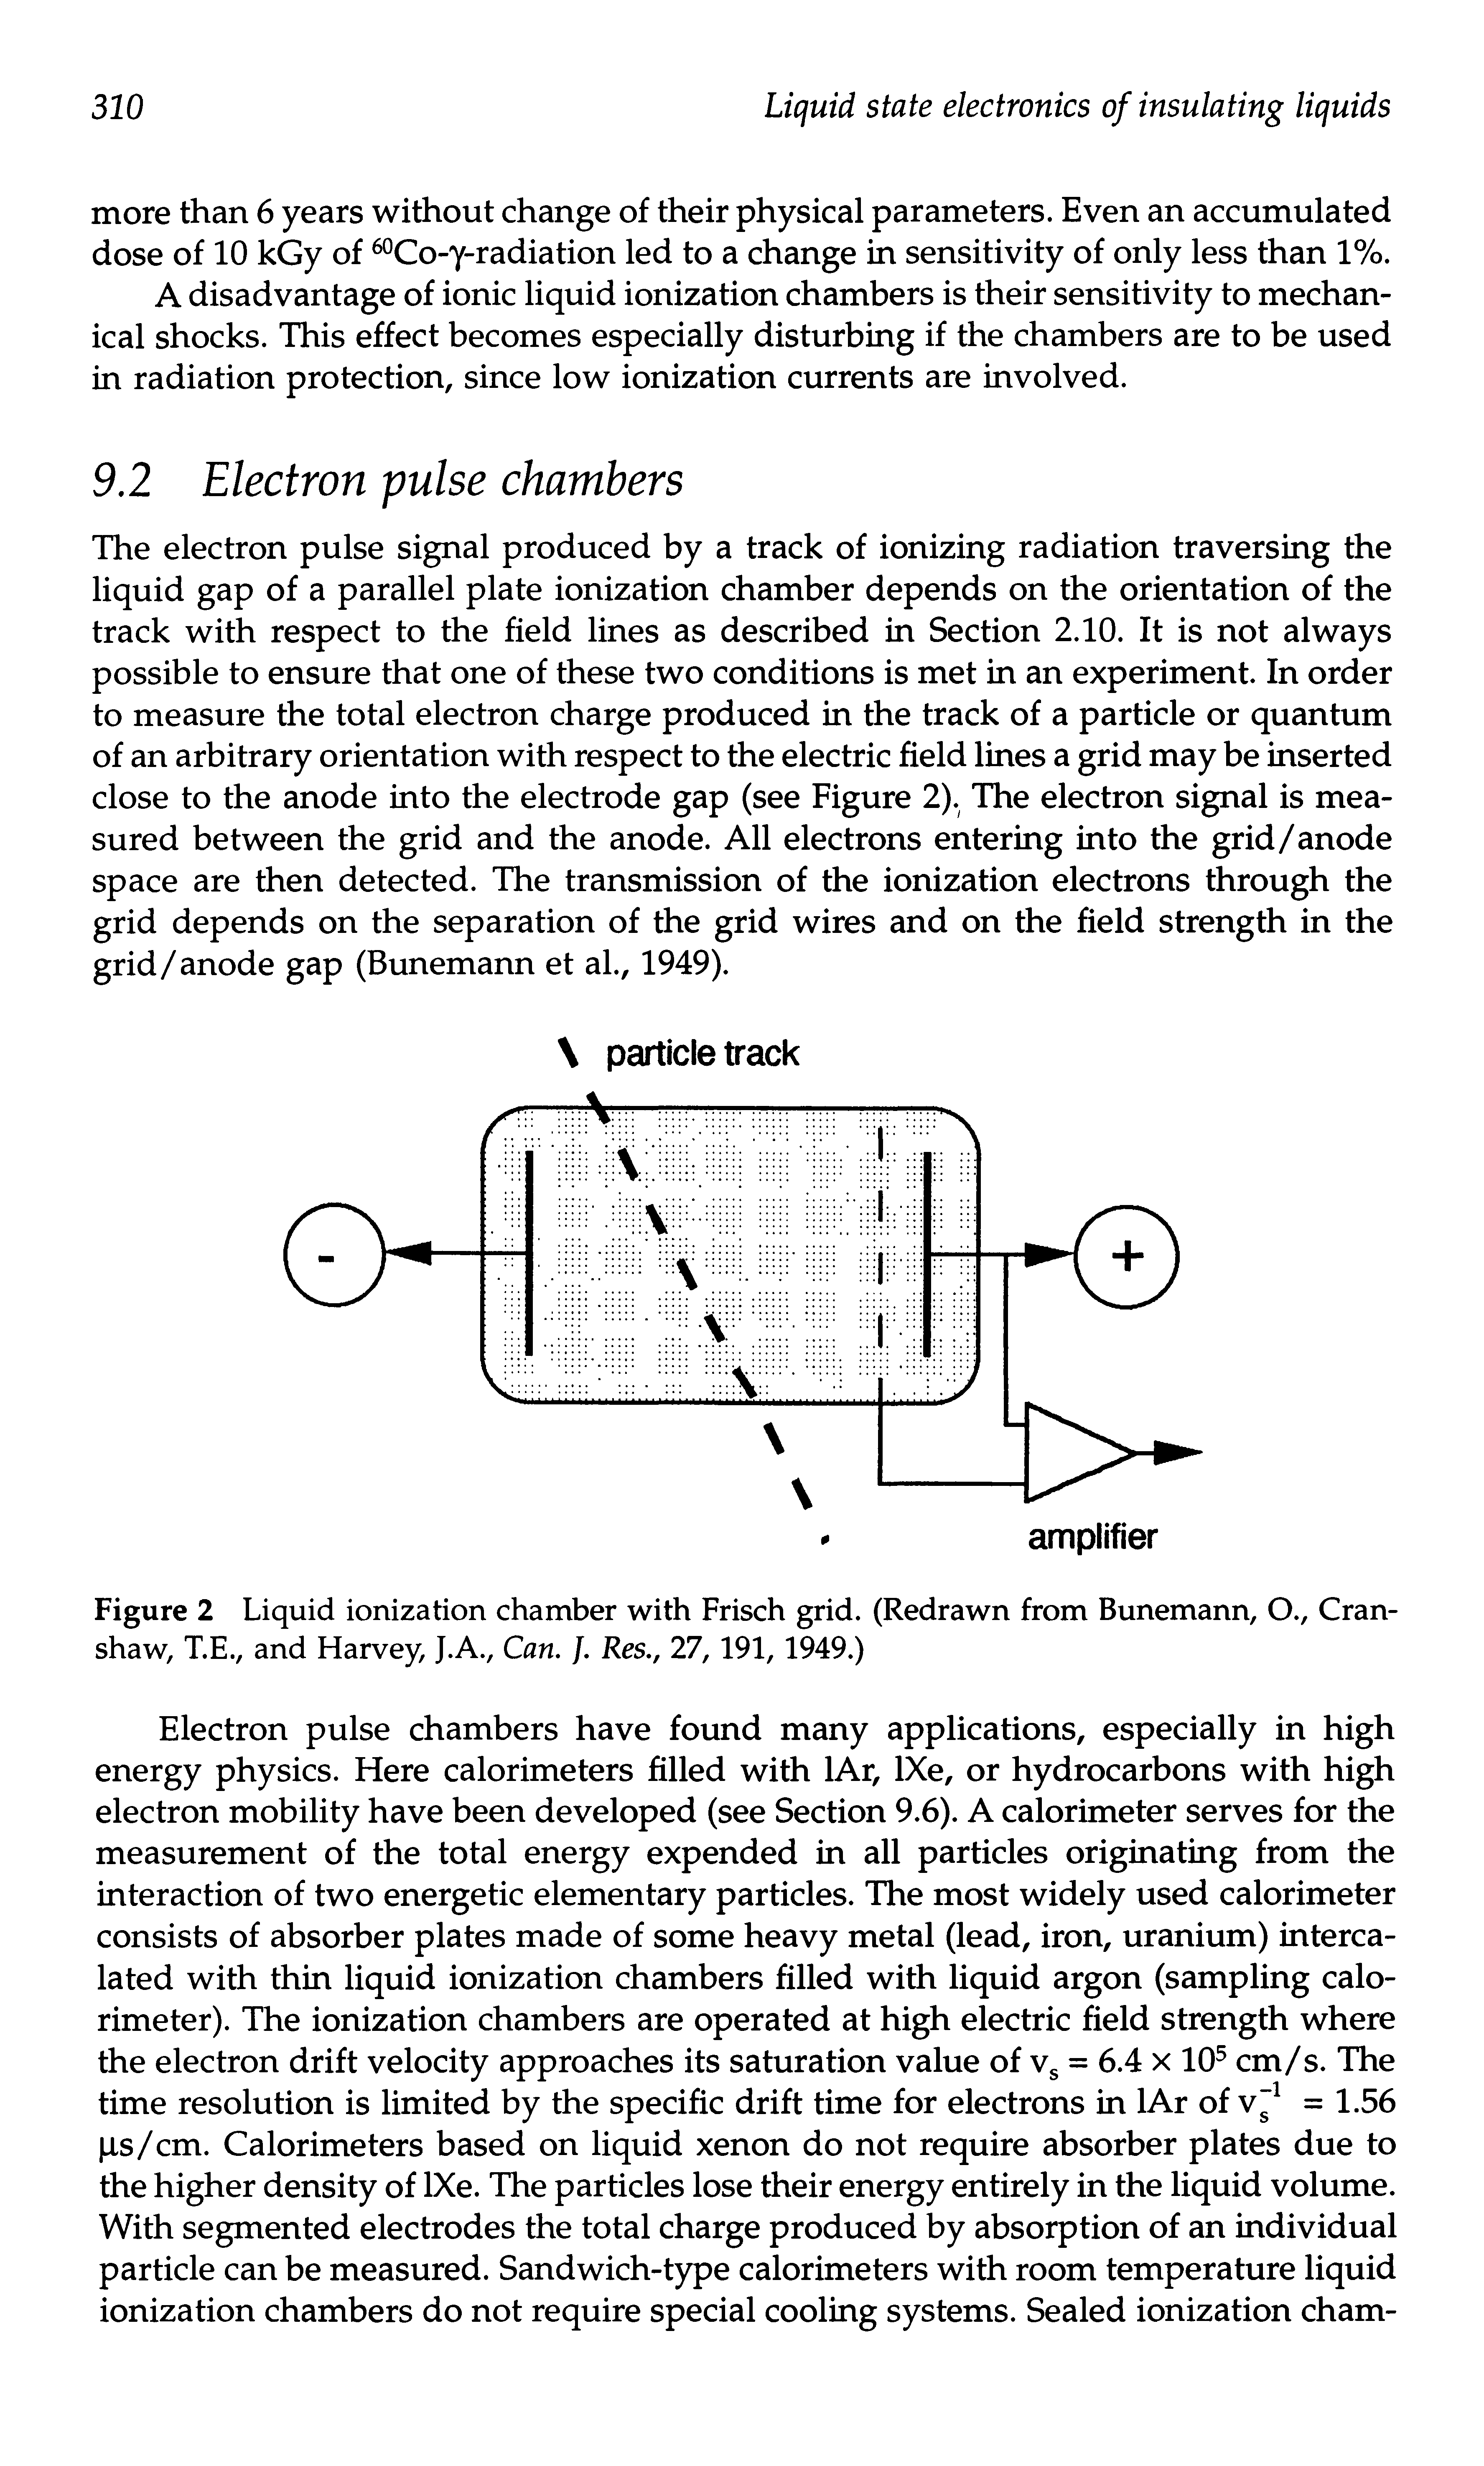 Figure 2 Liquid ionization chamber with Frisch grid. (Redrawn from Bunemann, O., Cran-shaw, T.E., and Harvey, J.A., Can. J. Res., 27,191,1949.)...